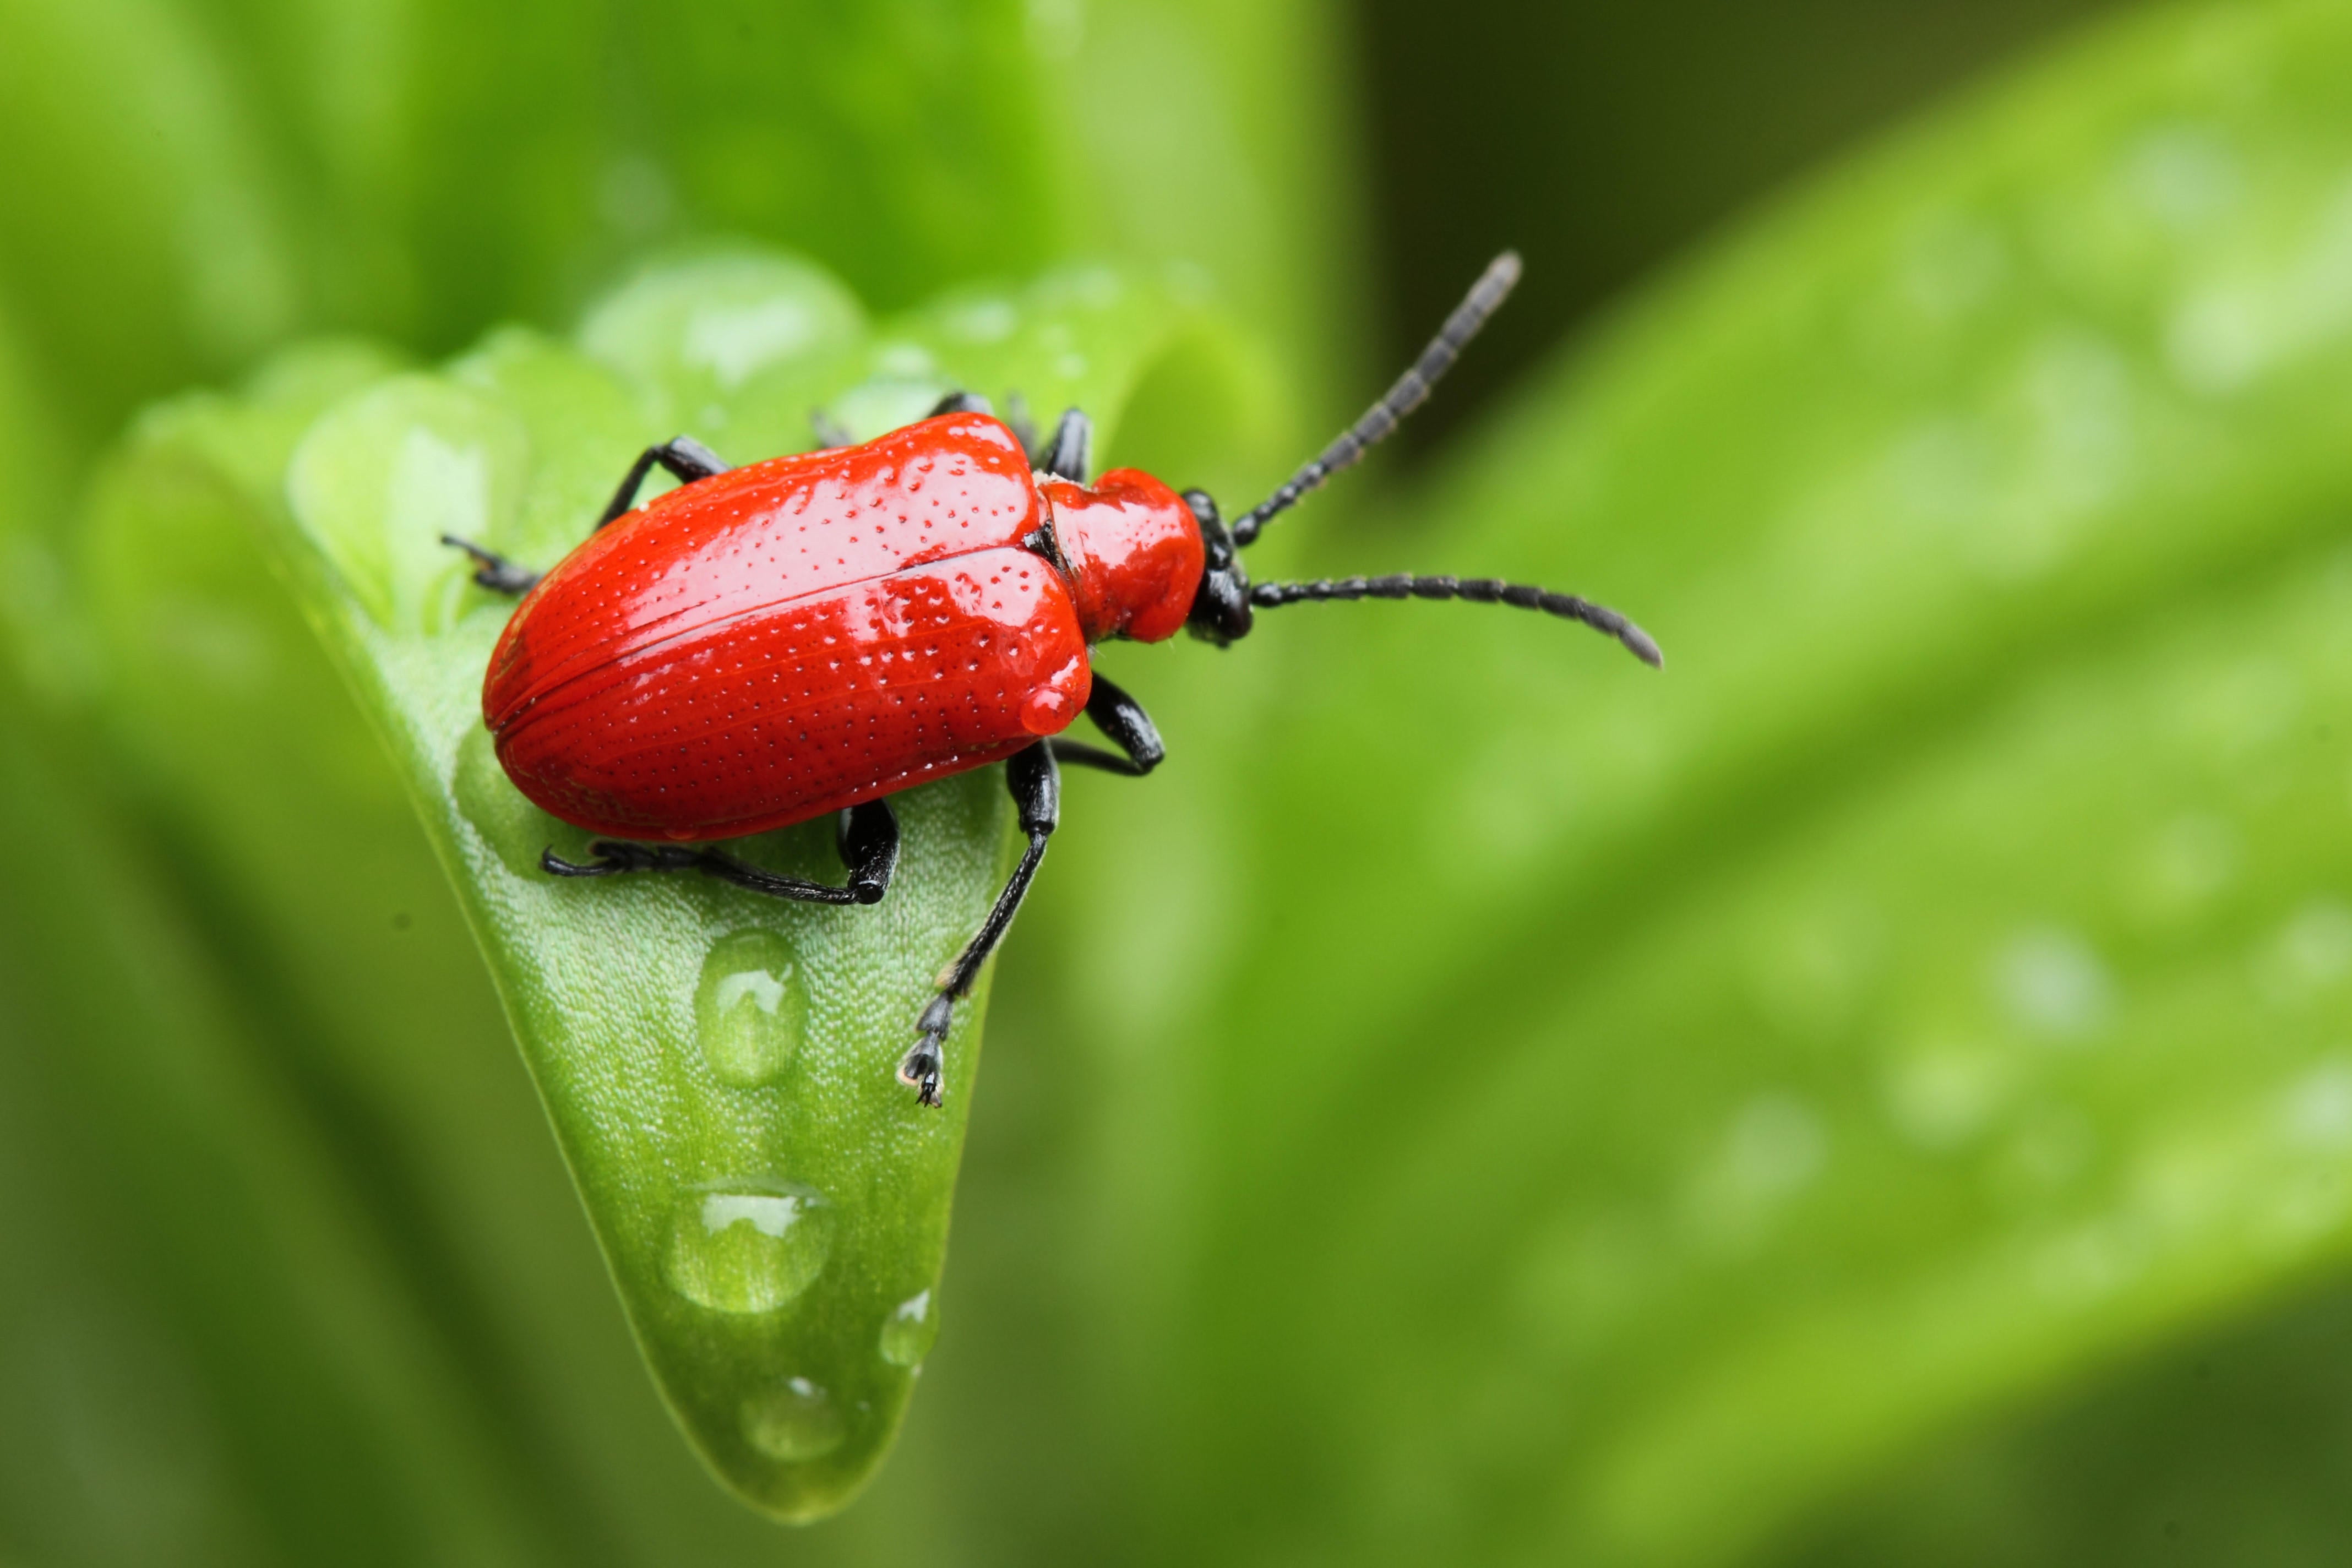 Lily beetle on a leaf in the rain (Alamy/PA)